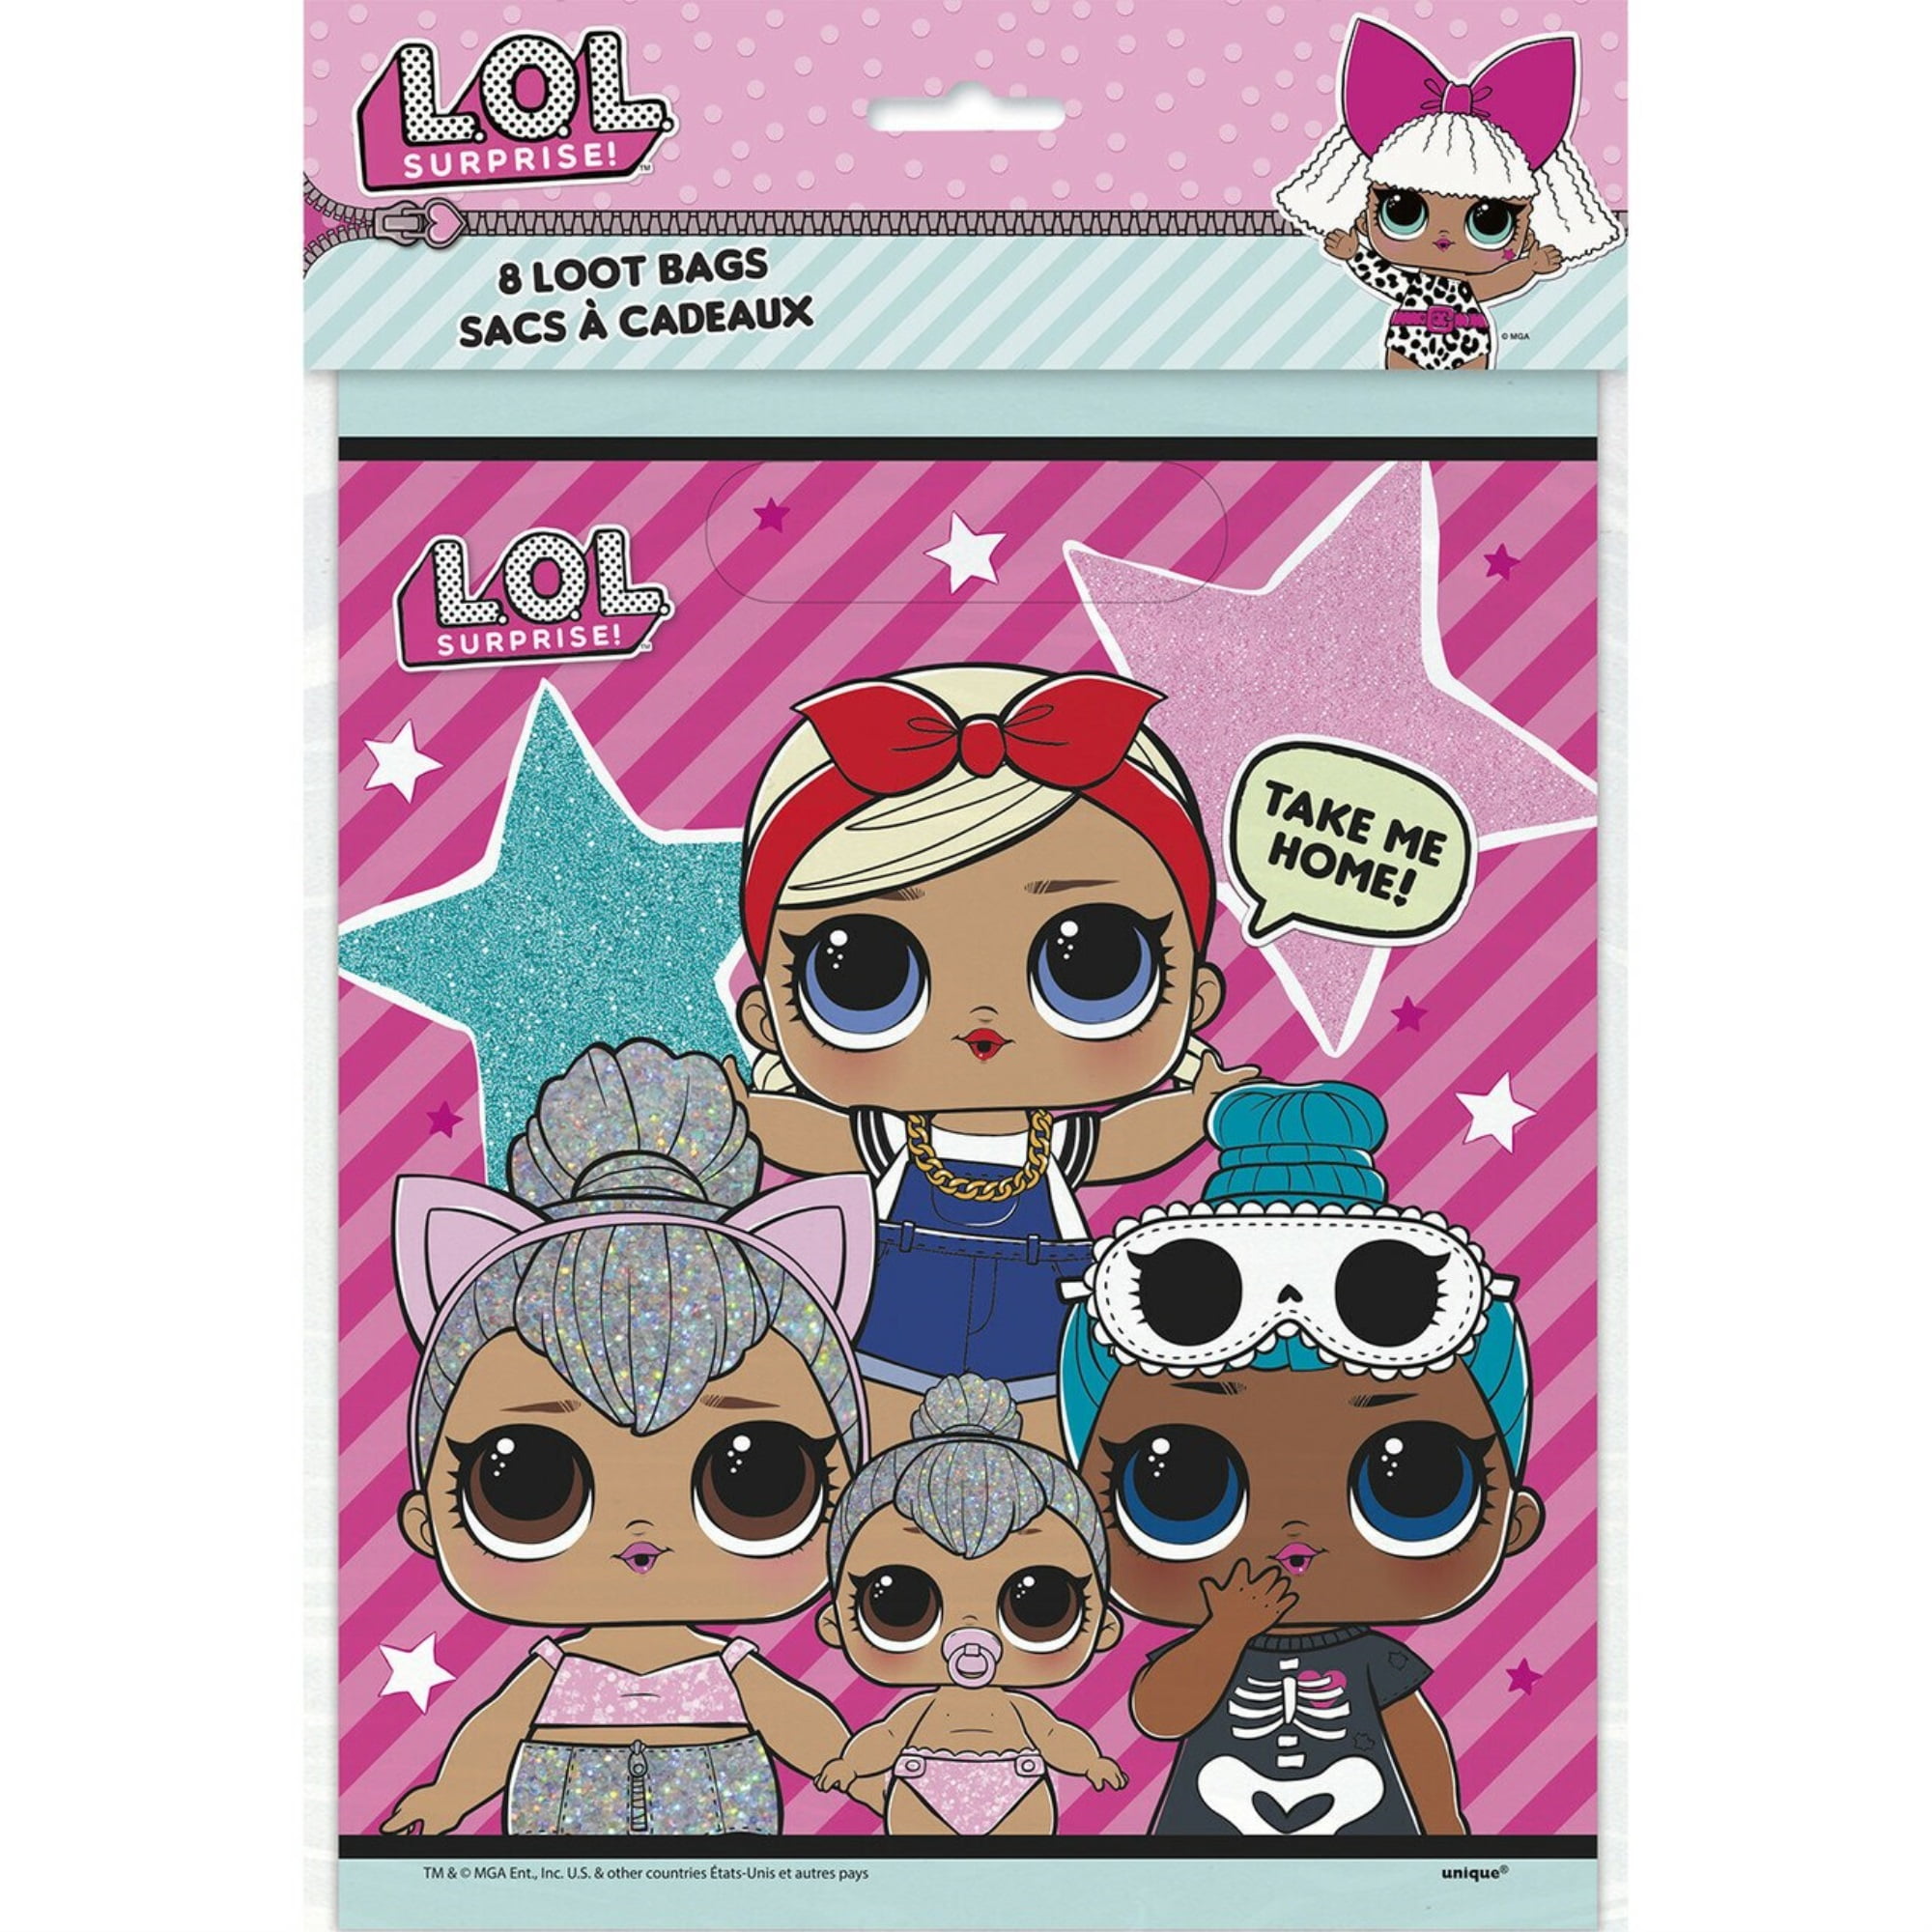 Lol Doll X 20 Chocolate Nut Safe Lollies Kids party bag filler Loot Favour